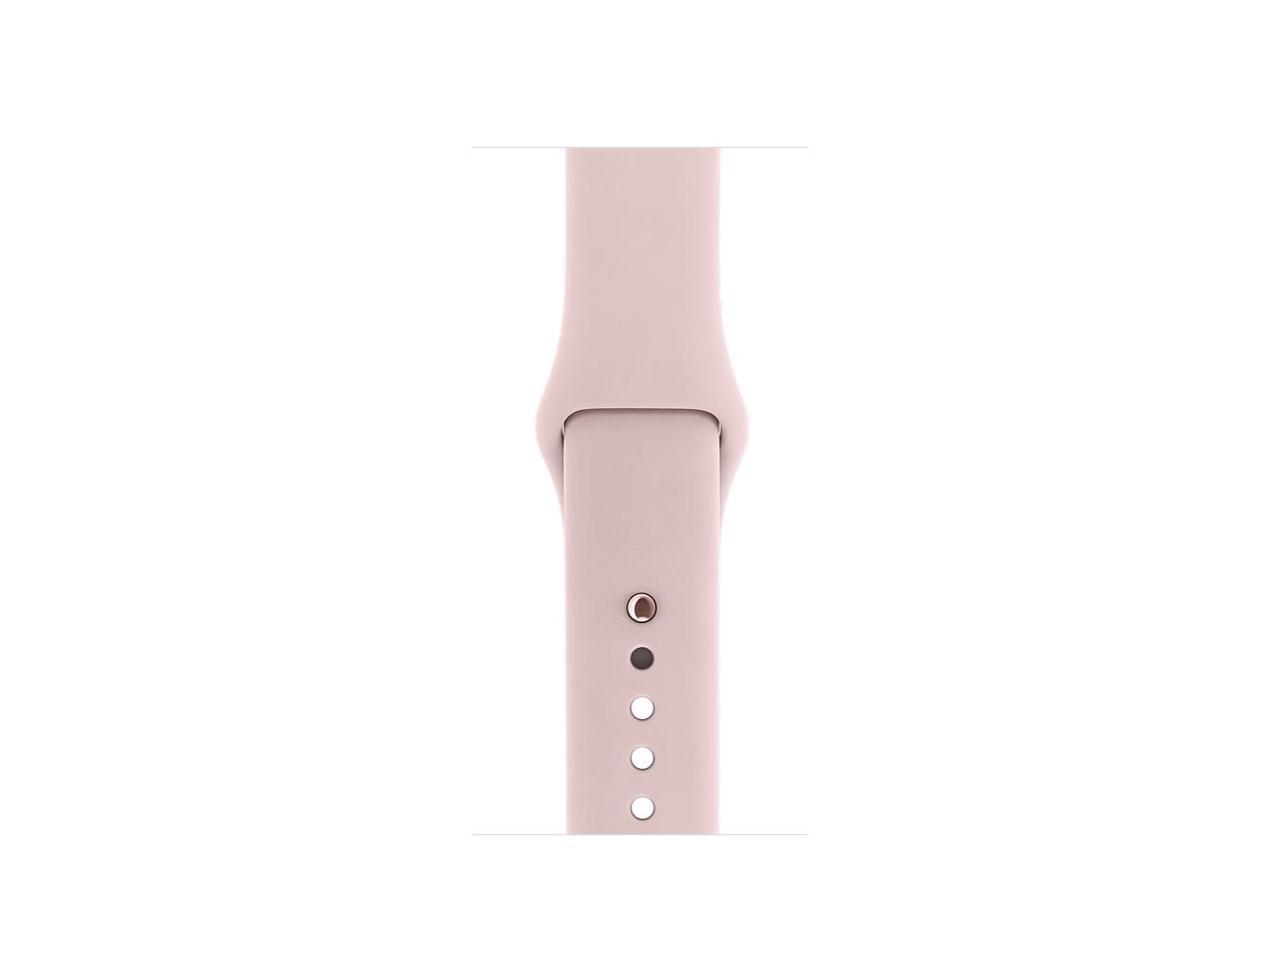 apple watch series one rose gold